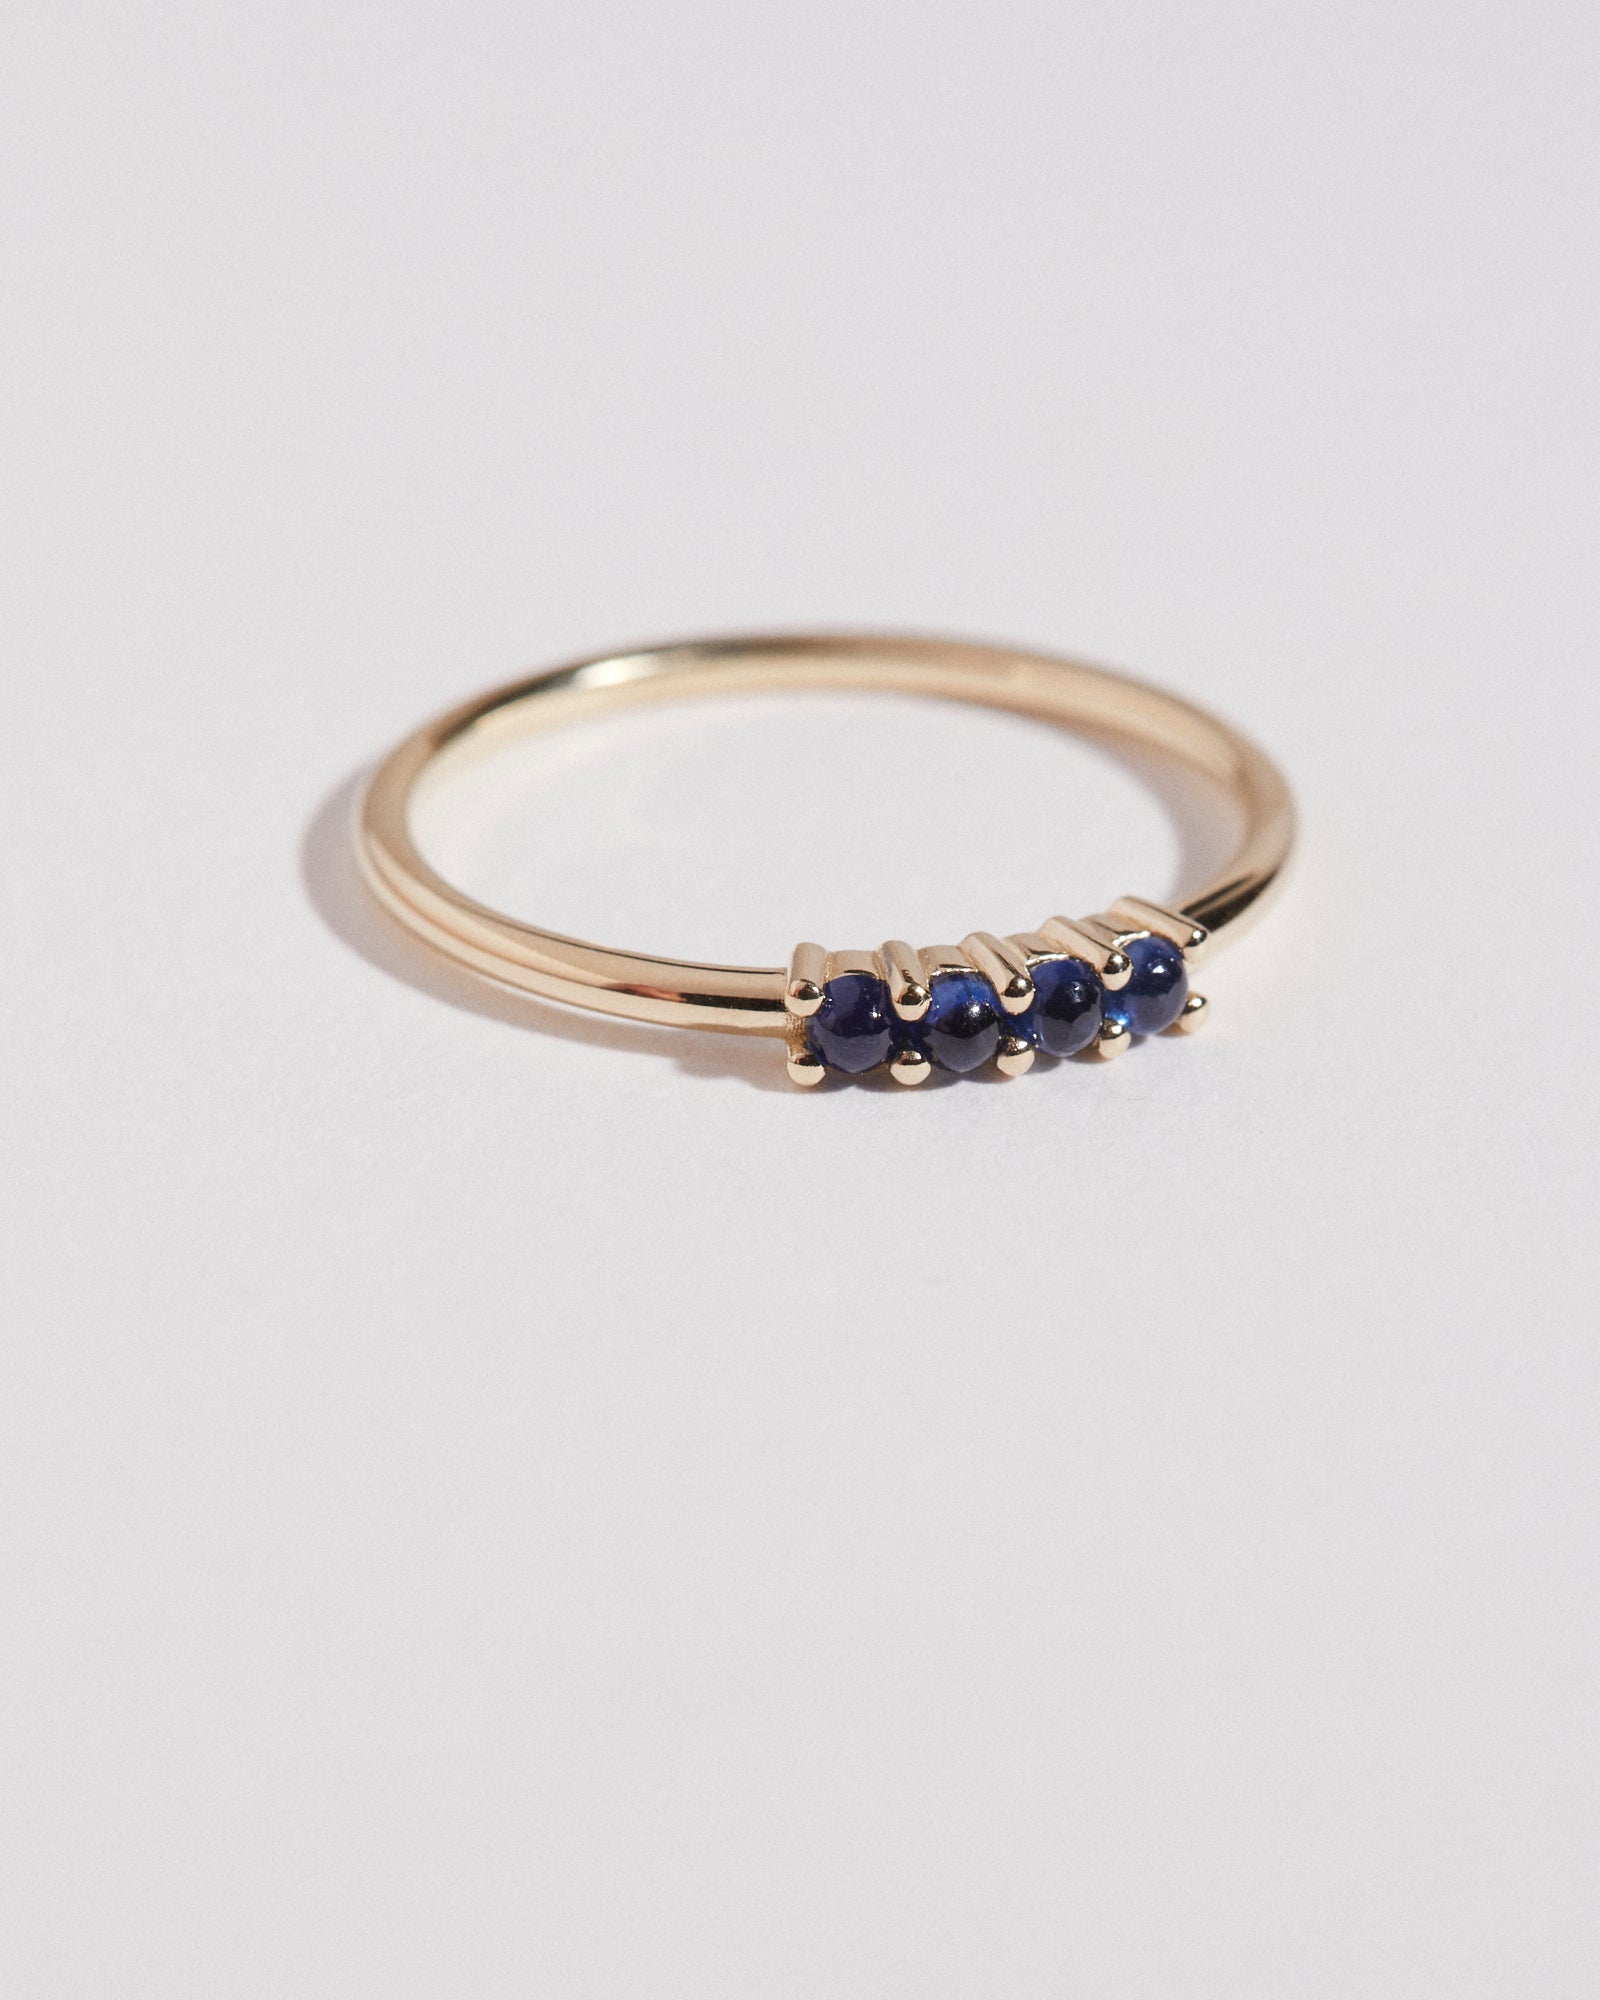 Cabochon Sapphire stacking ring.